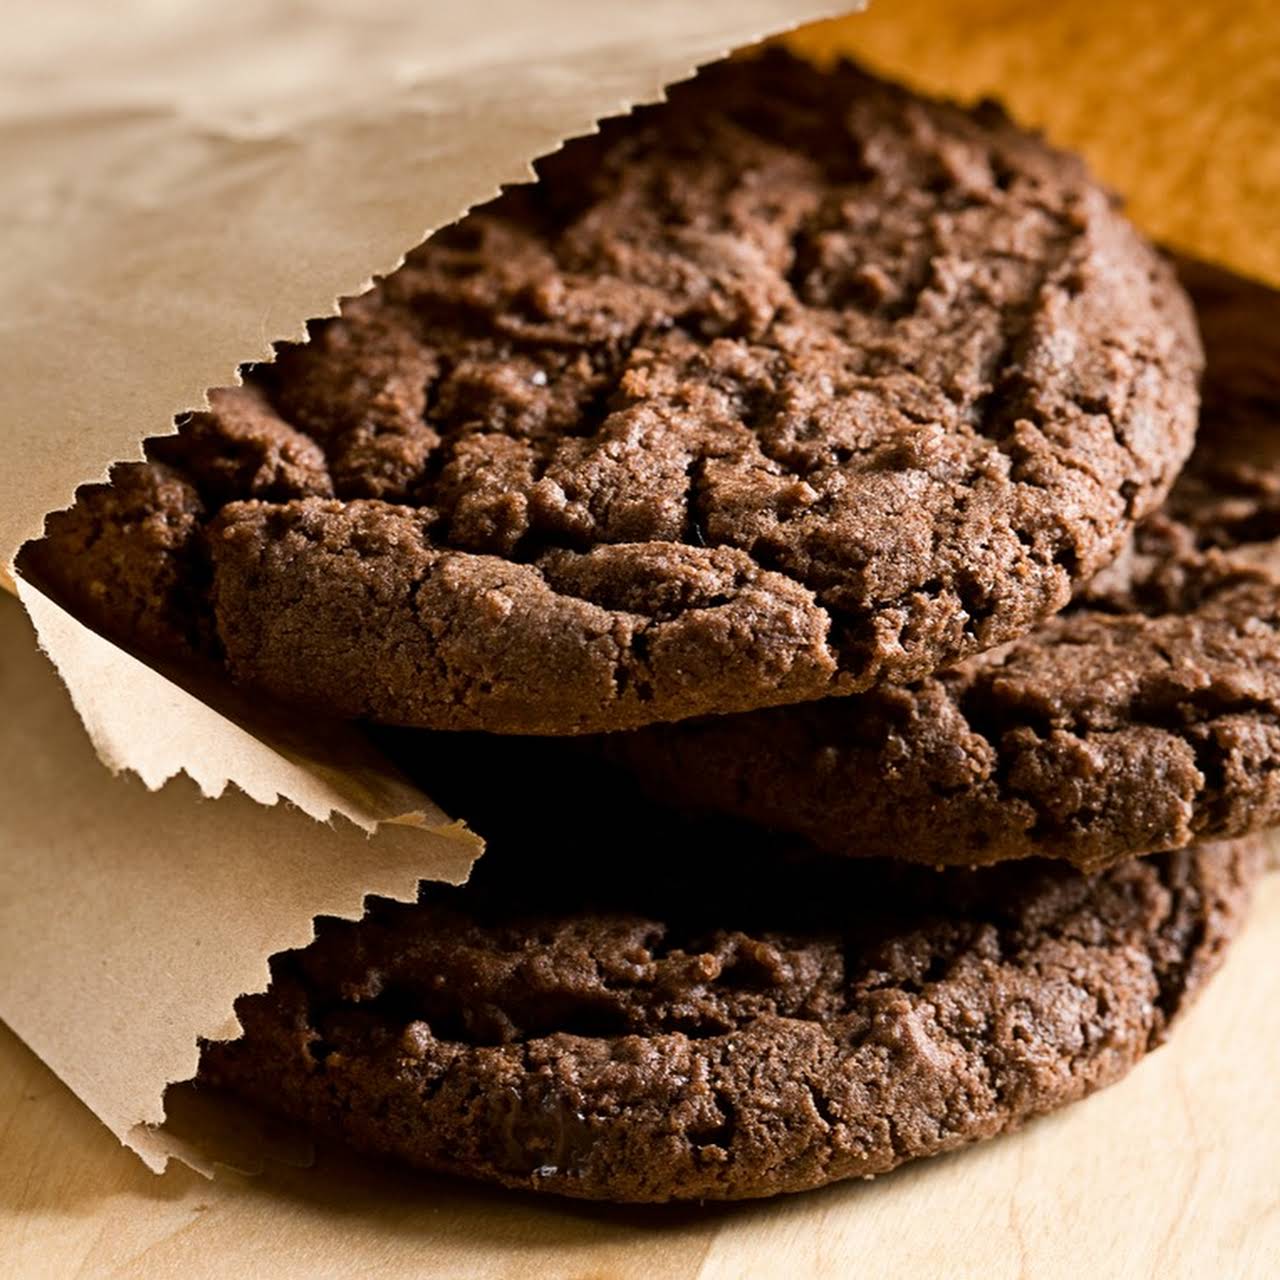 Chocolate Chocolate Cookies In The Manner Of Cookie Crumbs